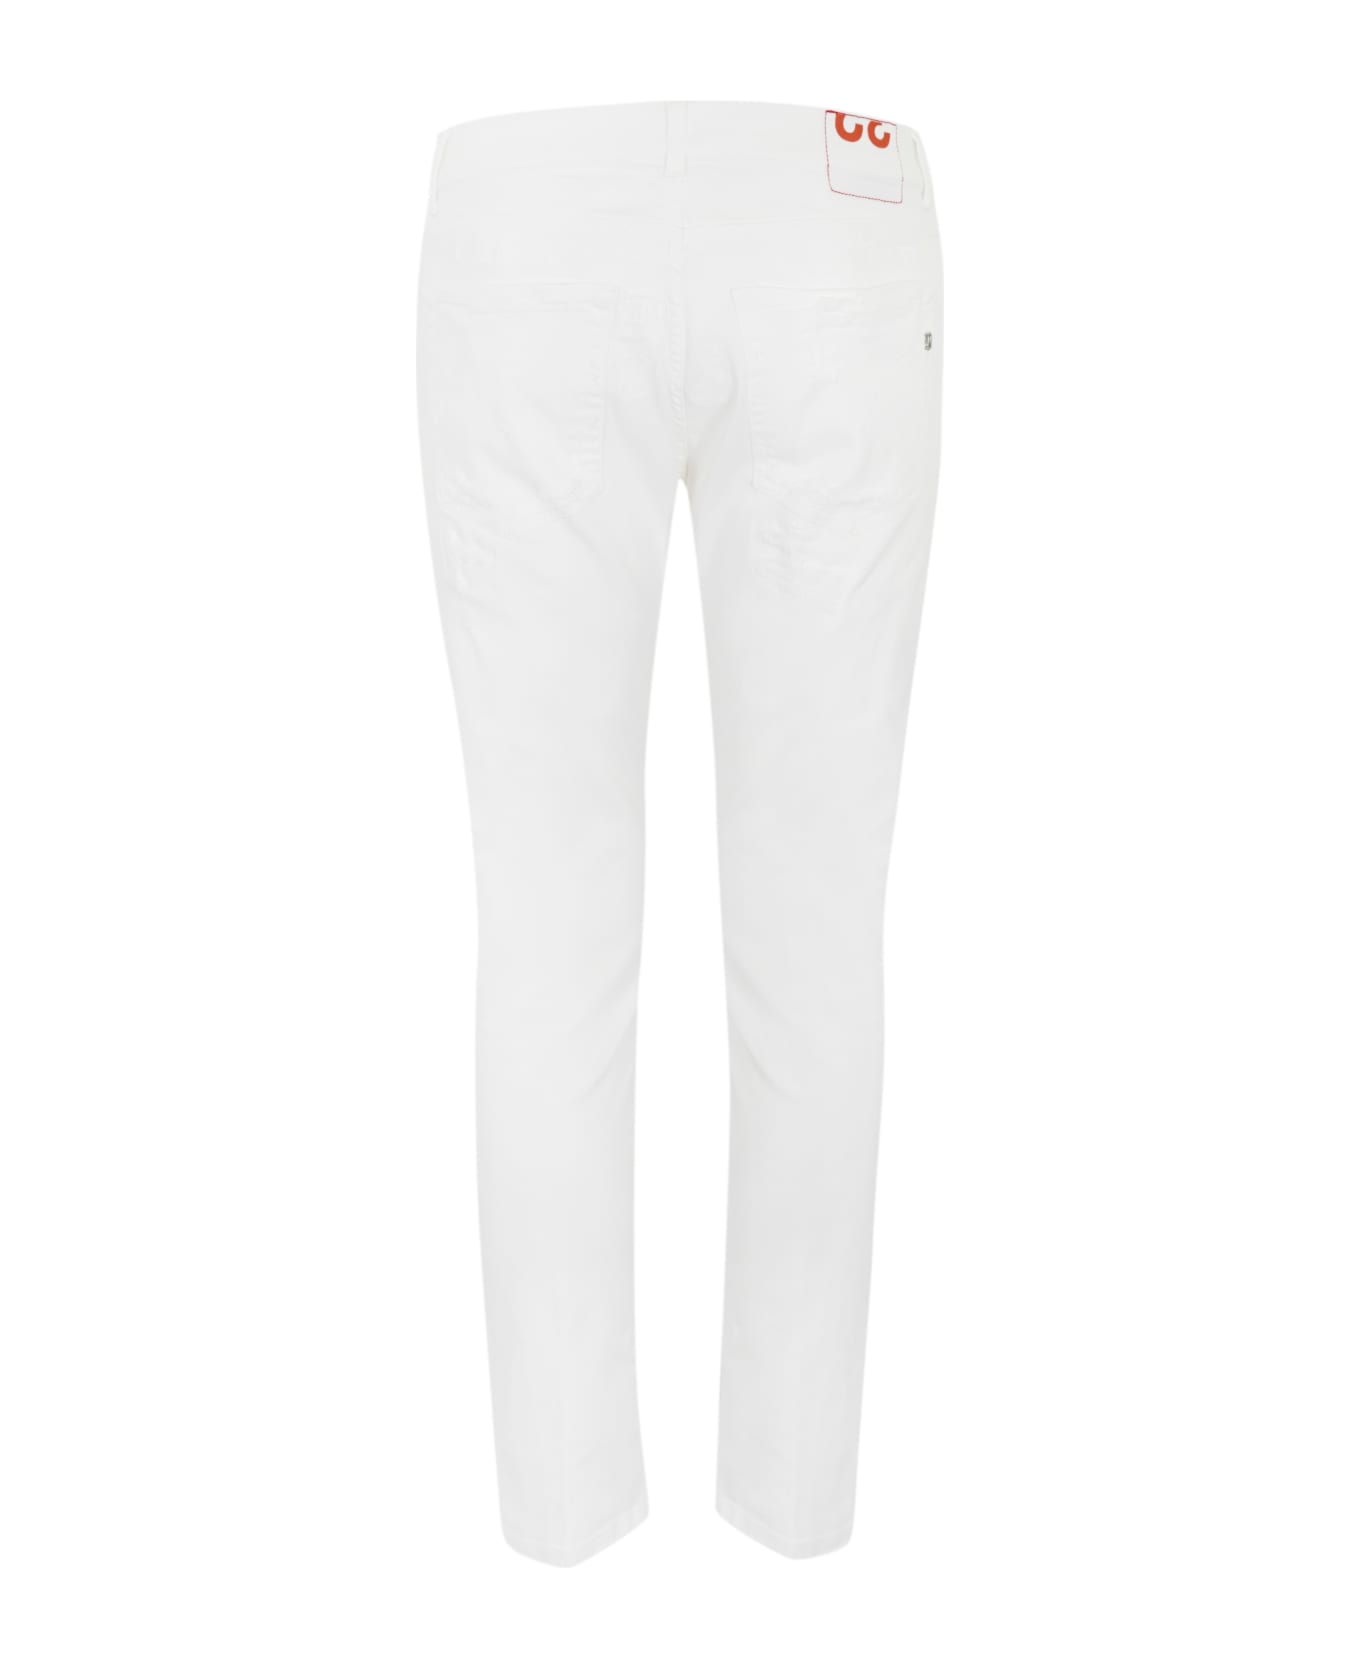 Dondup Dian Carrot Jeans In Bull Stretch - White ボトムス